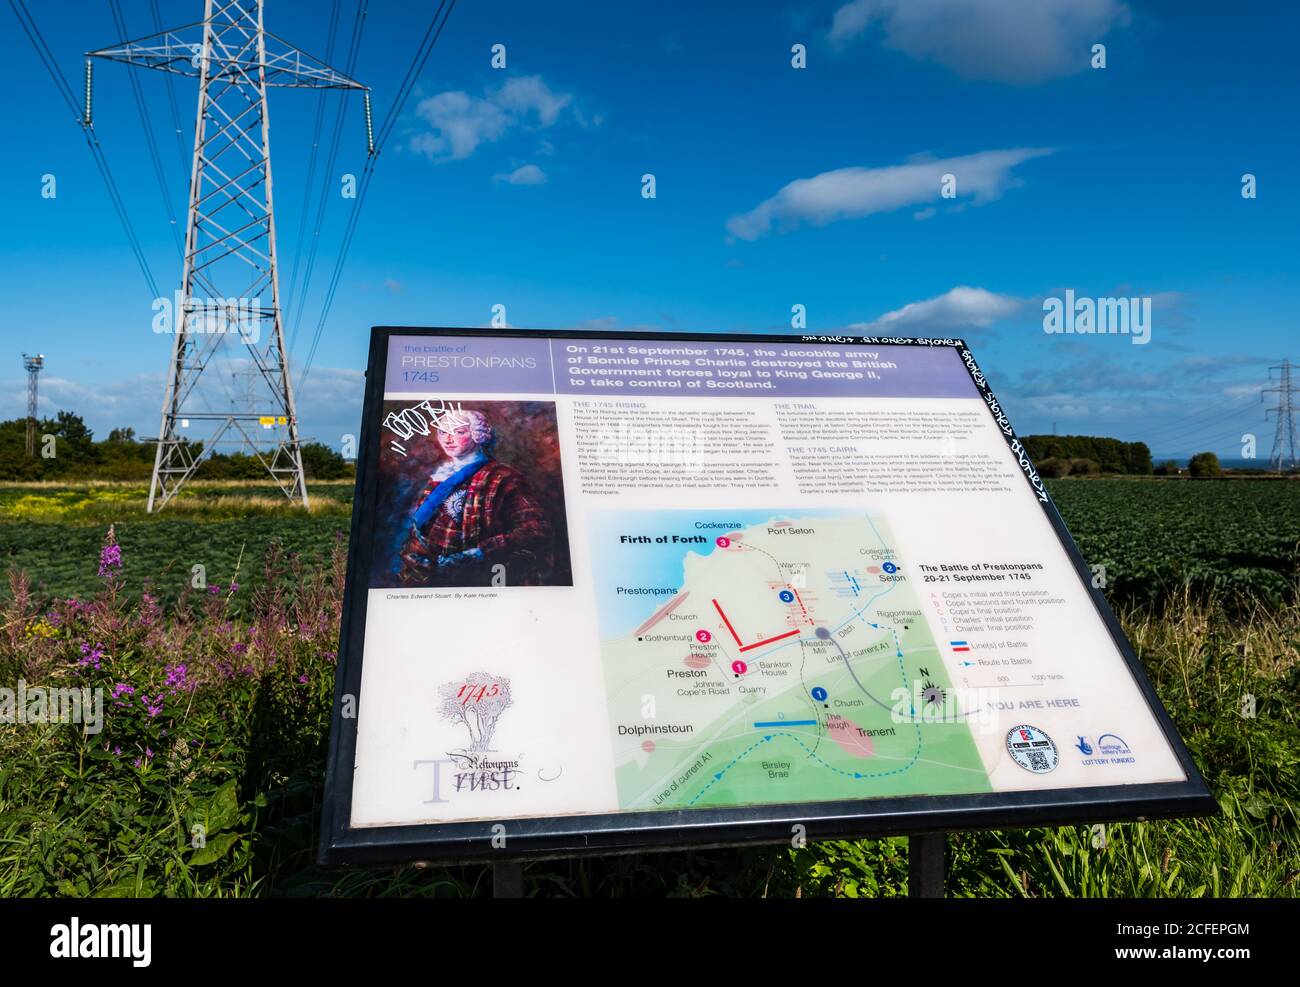 Prestonpans, East Lothian, Scotland, United Kingdom, 5th September 2020. Preparations for the 275th anniversary of the Battle of Prestonpans in which the Jacobites, led by Charles Edward Stuart, defeated the British Army led by Sir john Cope on 21st September in 1745. New interpretation boards around the battlefield have been put in place. Commemorations will be online this year.. A new interpretation board by the roadside next to an electricity pylon Stock Photo